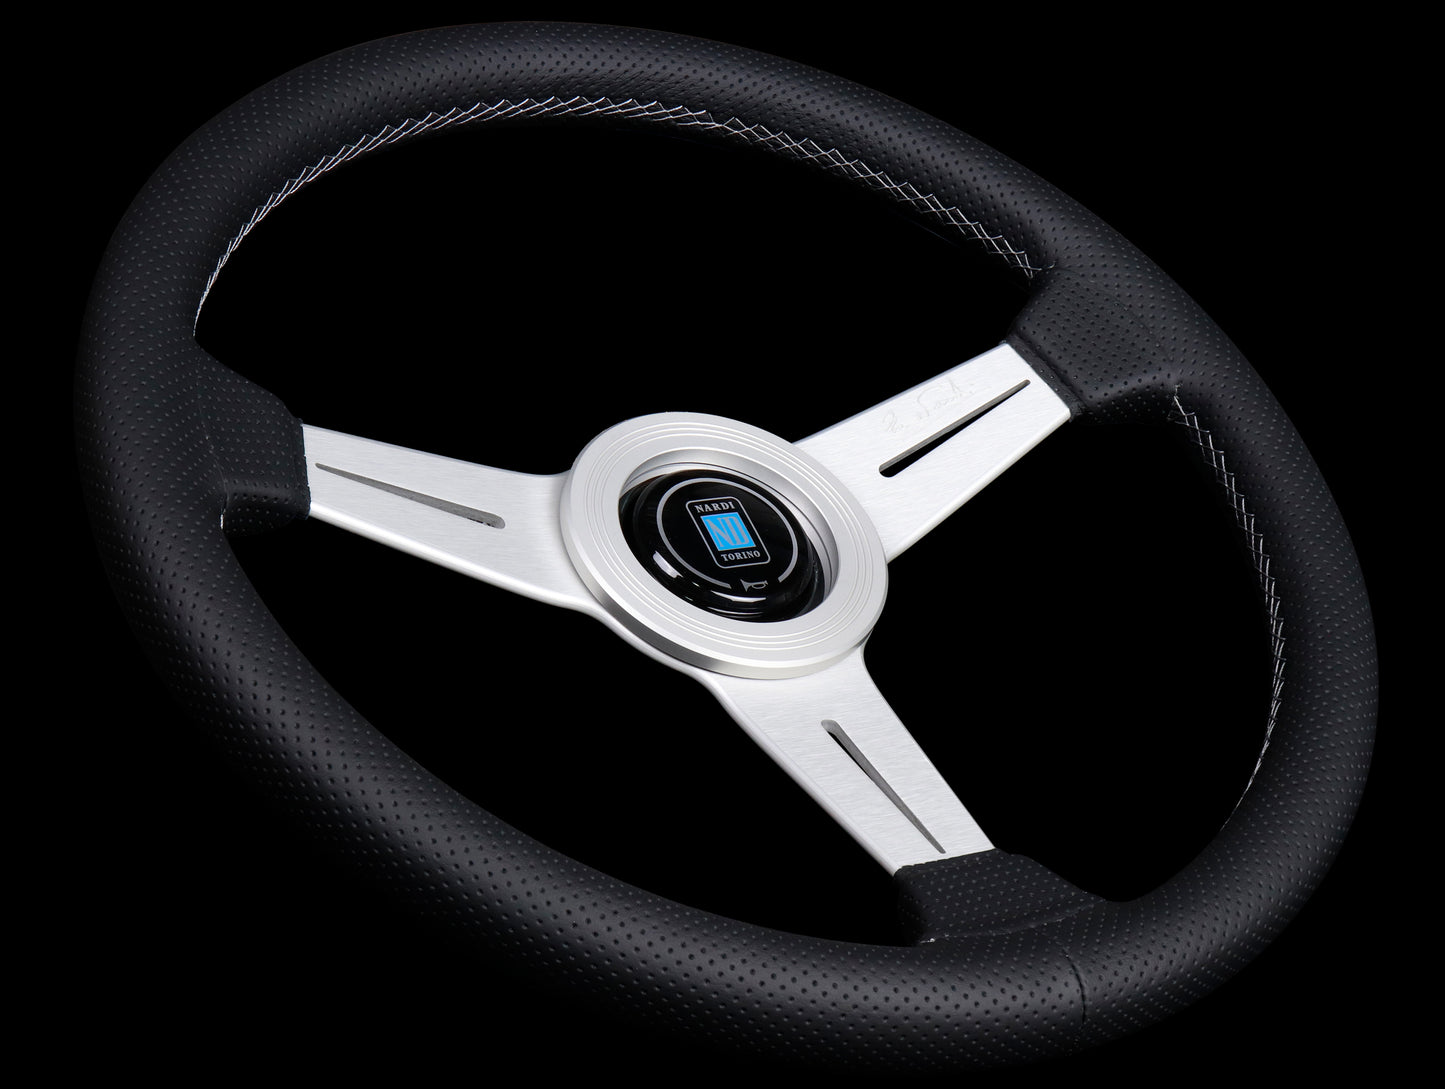 Nardi Classic 340mm Steering Wheel - Black Perforated Leather / Silver Spokes / Grey Stitch